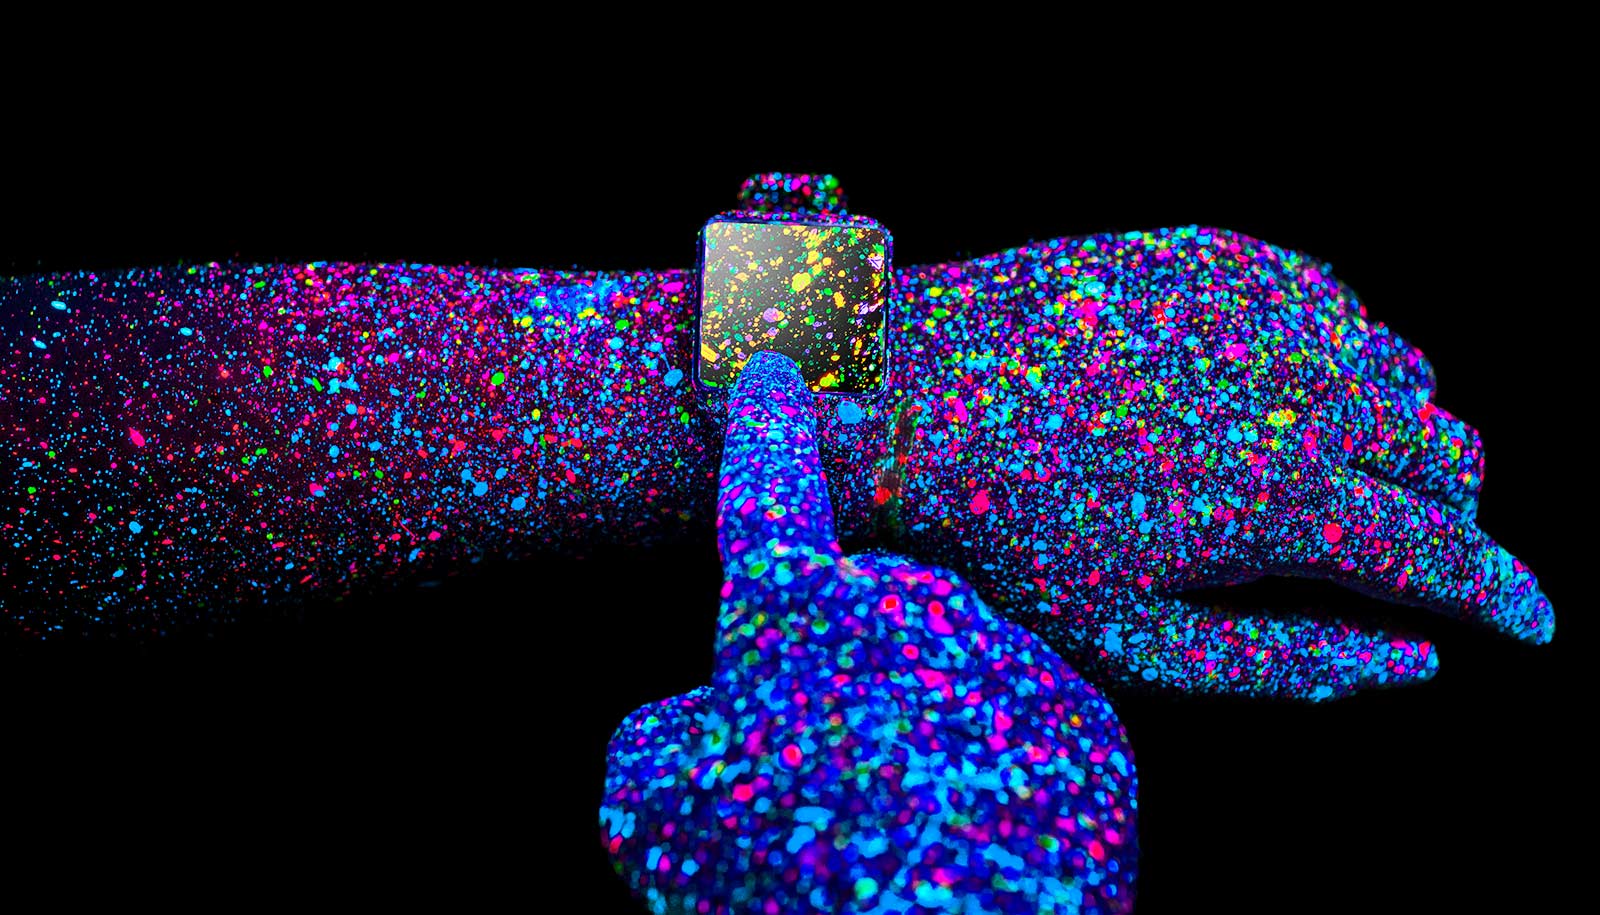 Two hands painted with colorful dots with a smartwatch on one wrist, all against a black background.